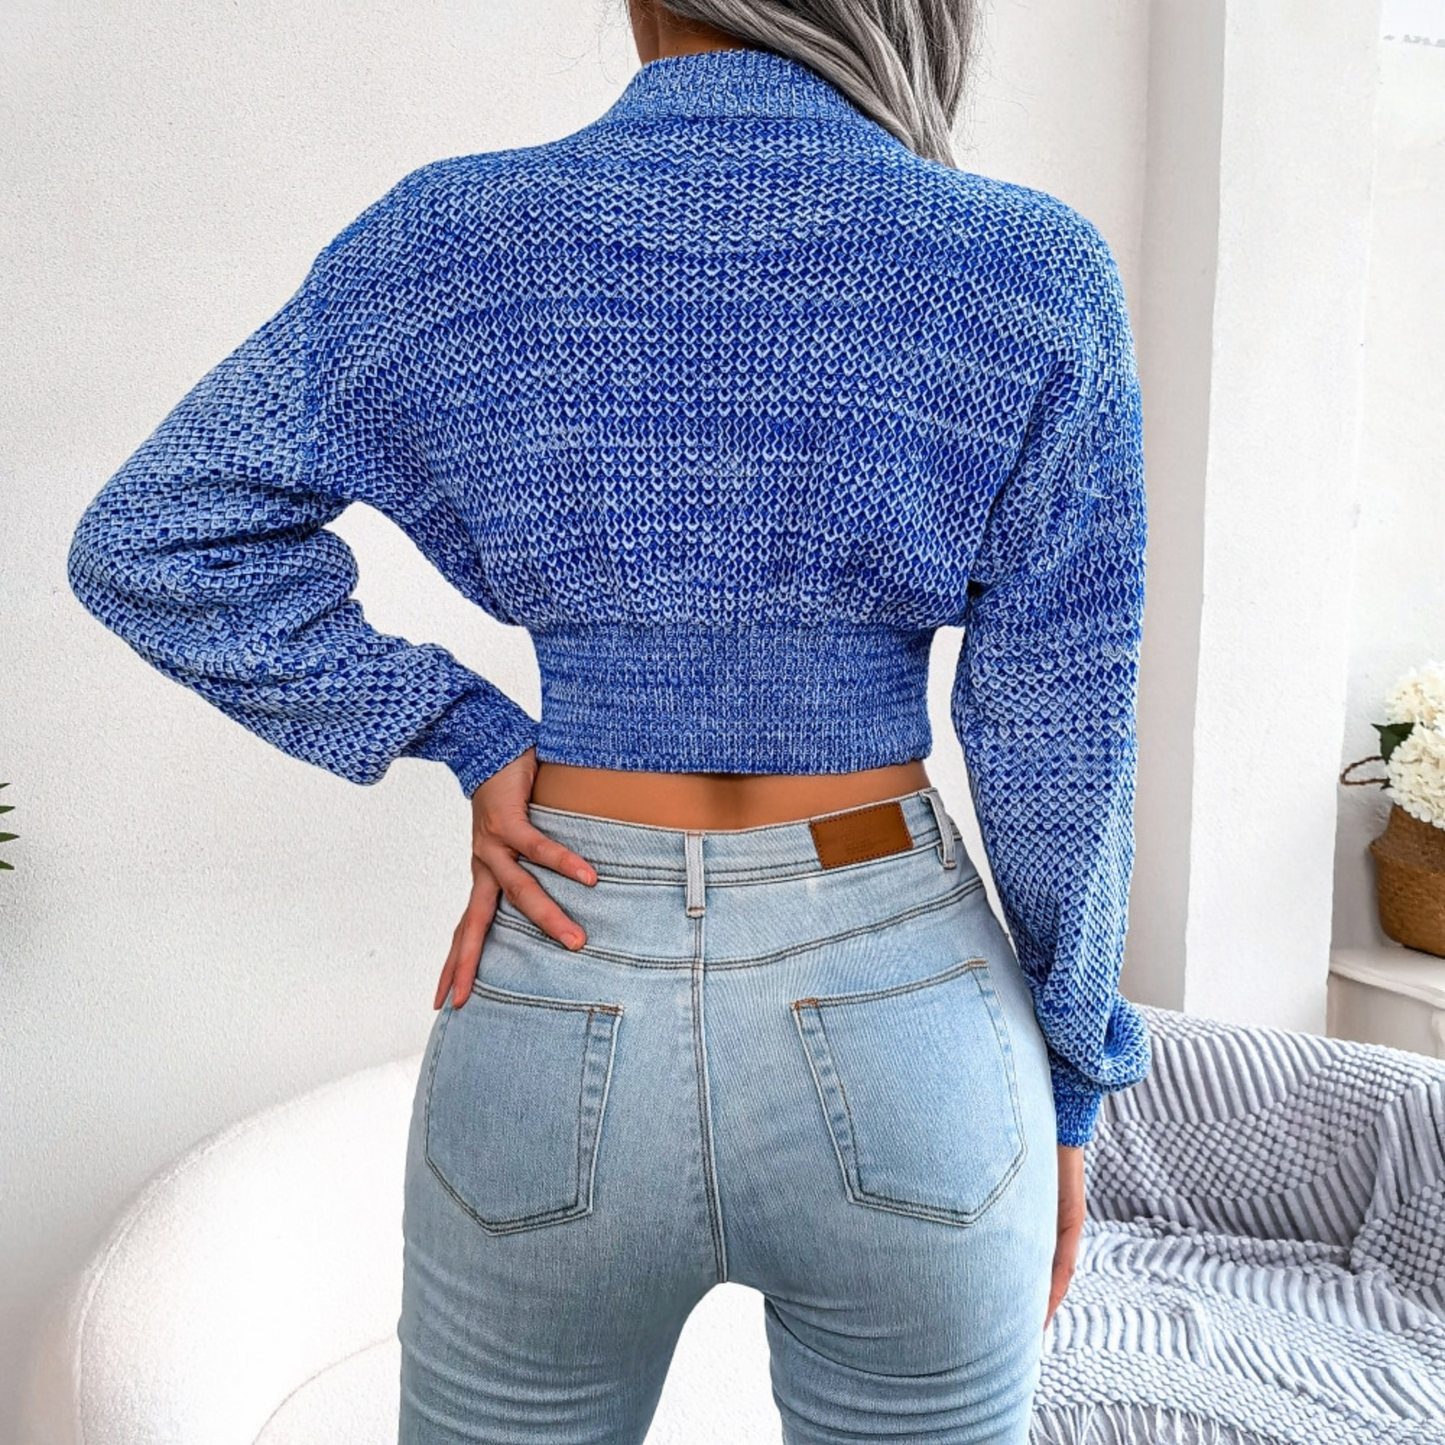 Blue knitted sweater top